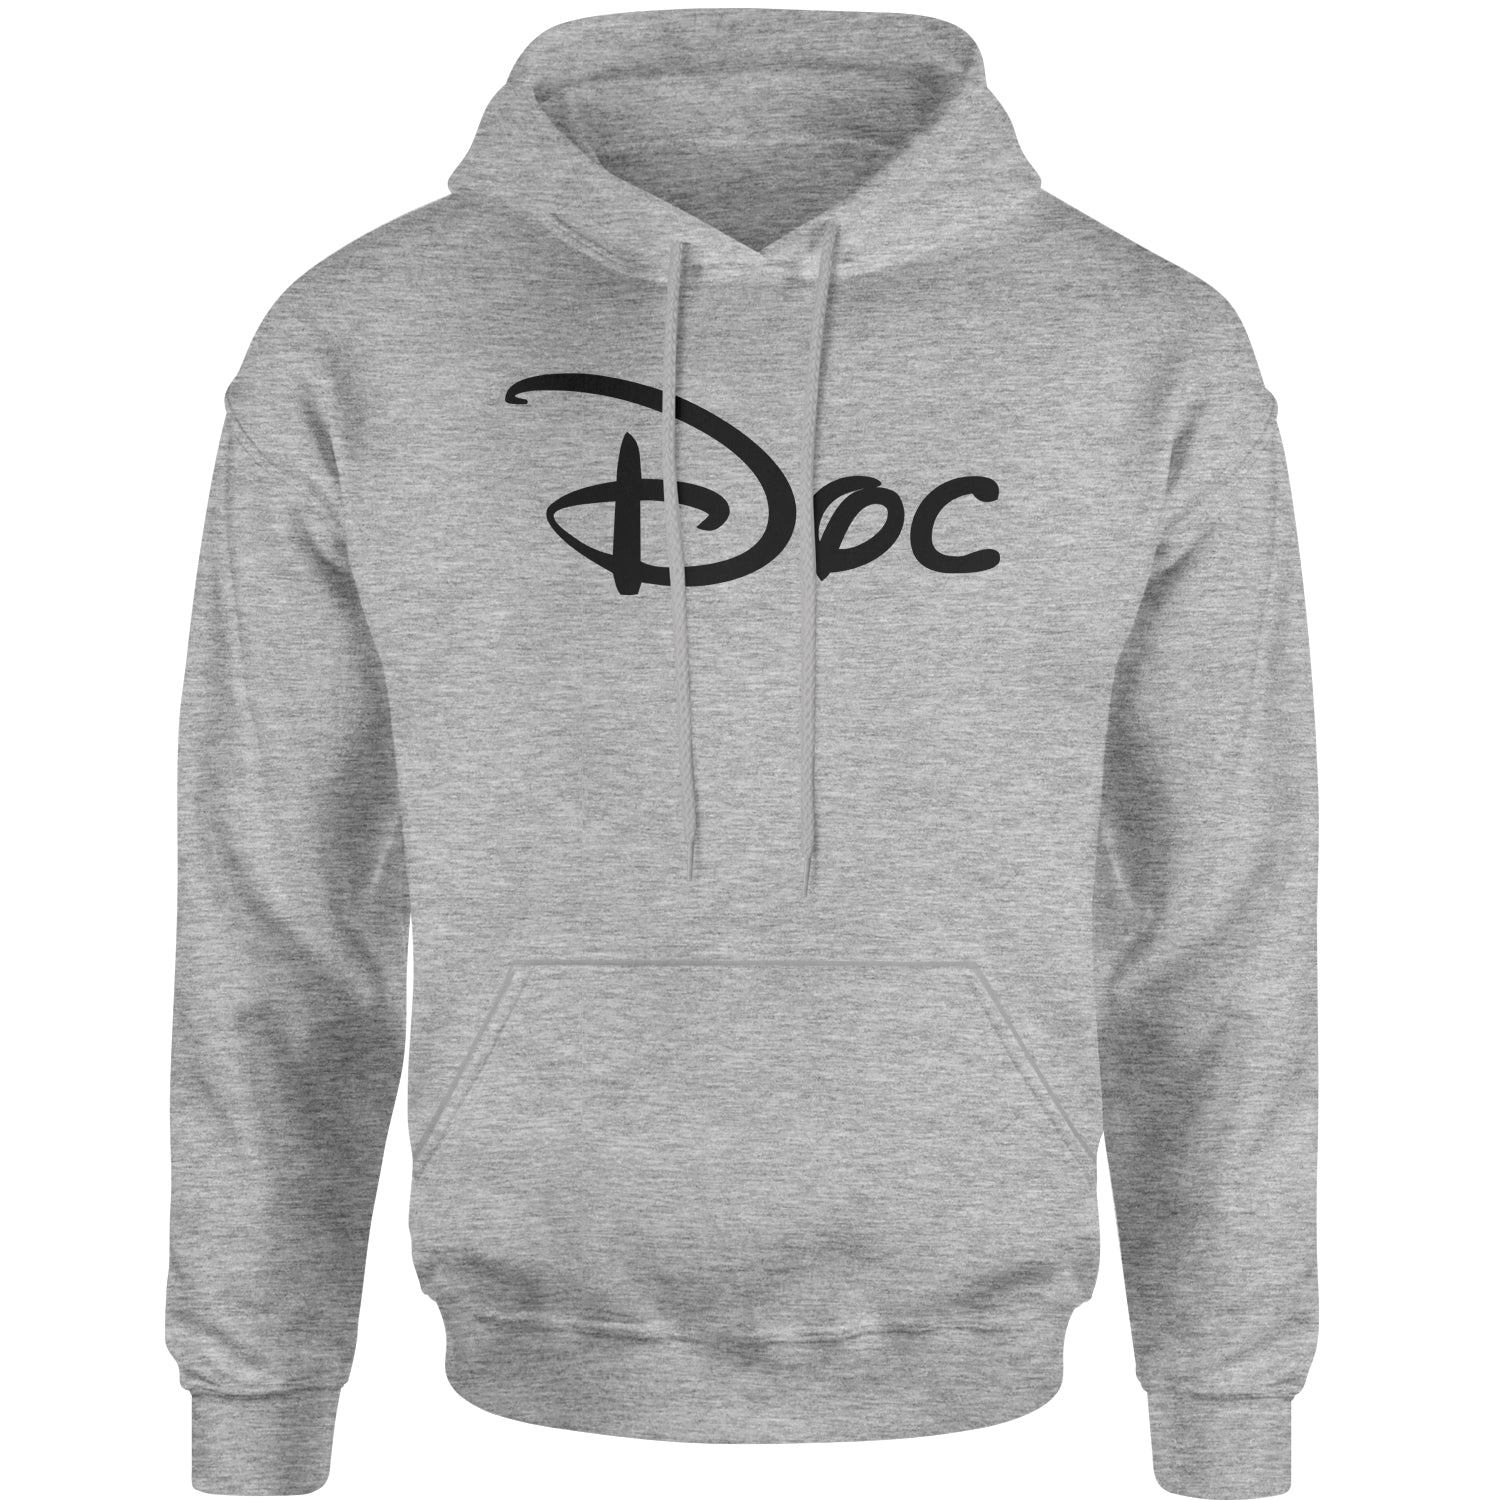 Doc - 7 Dwarfs Costume Adult Hoodie Sweatshirt and, costume, dwarfs, group, halloween, matching, seven, snow, the, white by Expression Tees